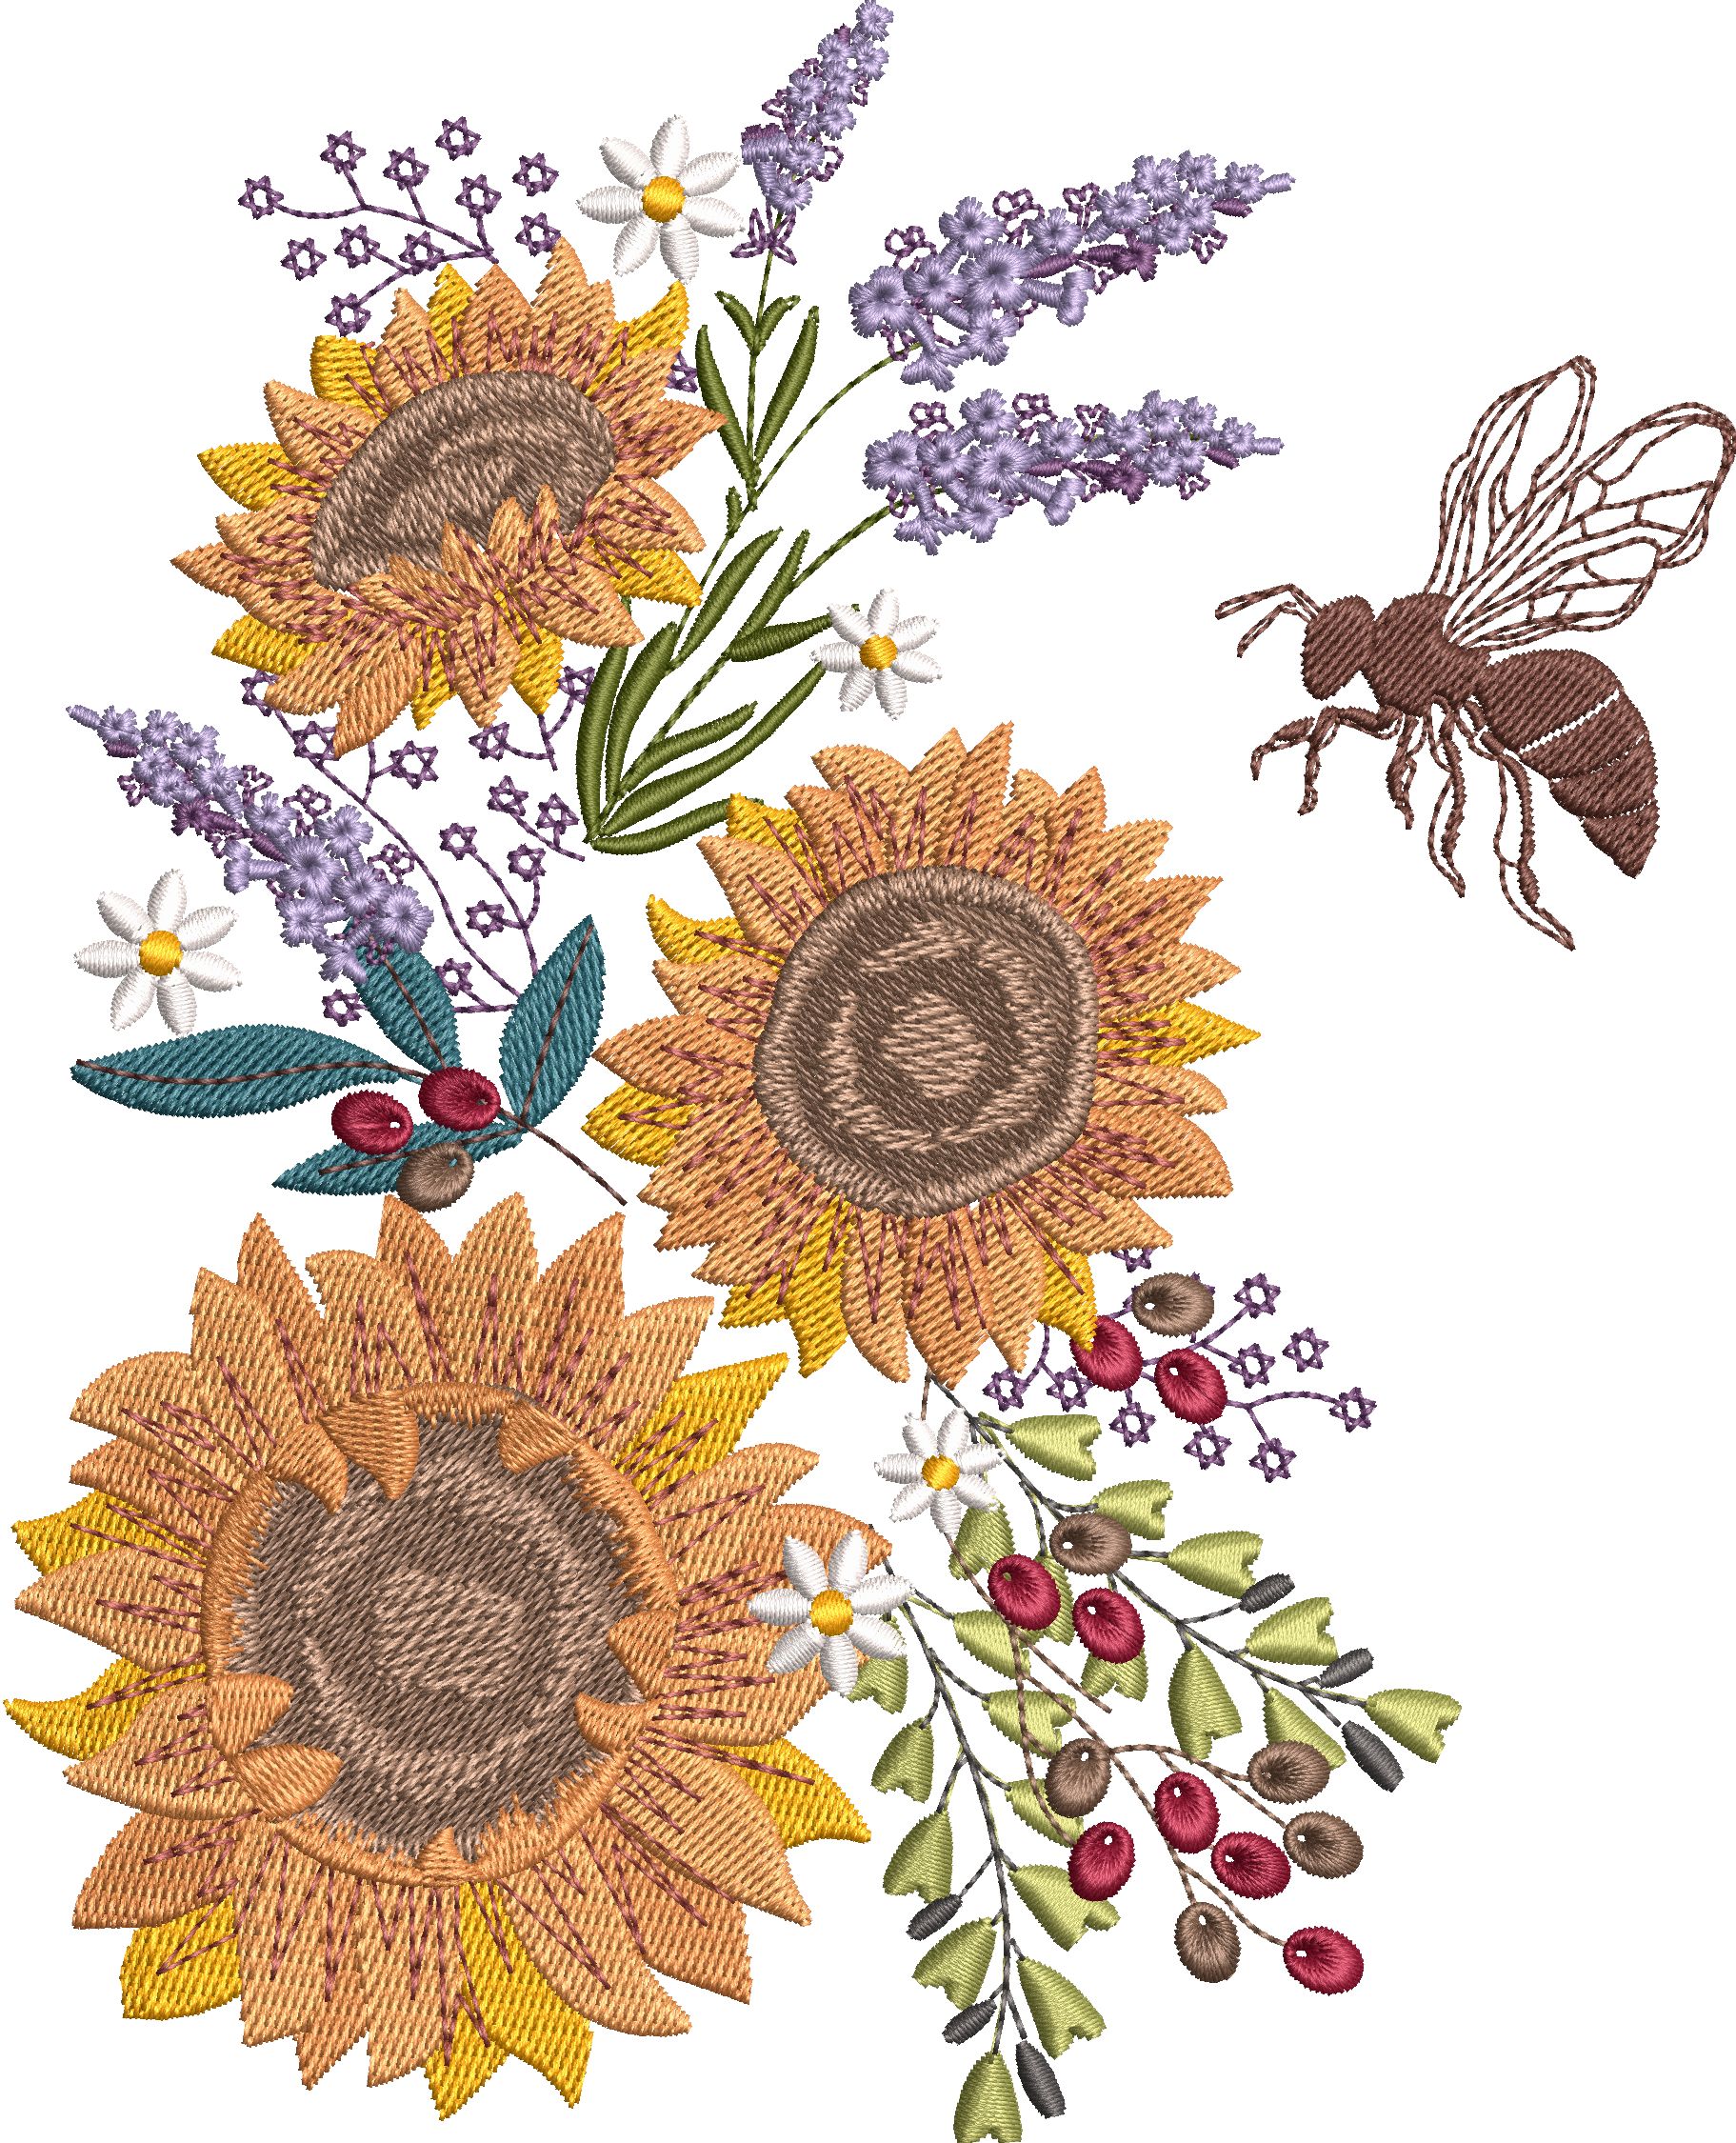 Bees and Flowers | OregonPatchWorks